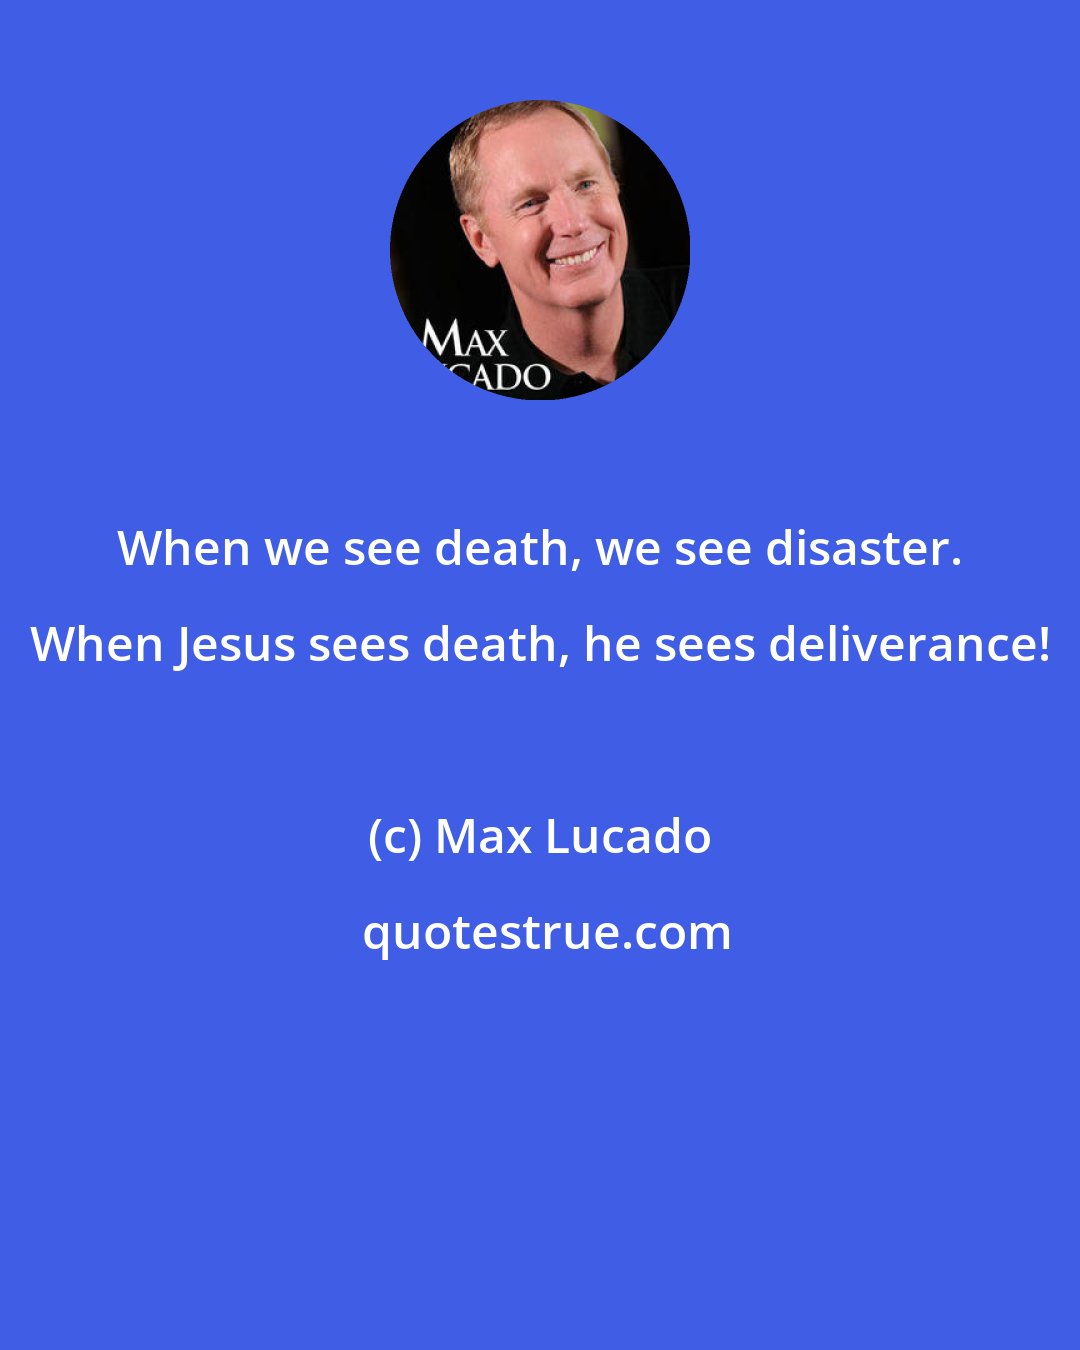 Max Lucado: When we see death, we see disaster. When Jesus sees death, he sees deliverance!